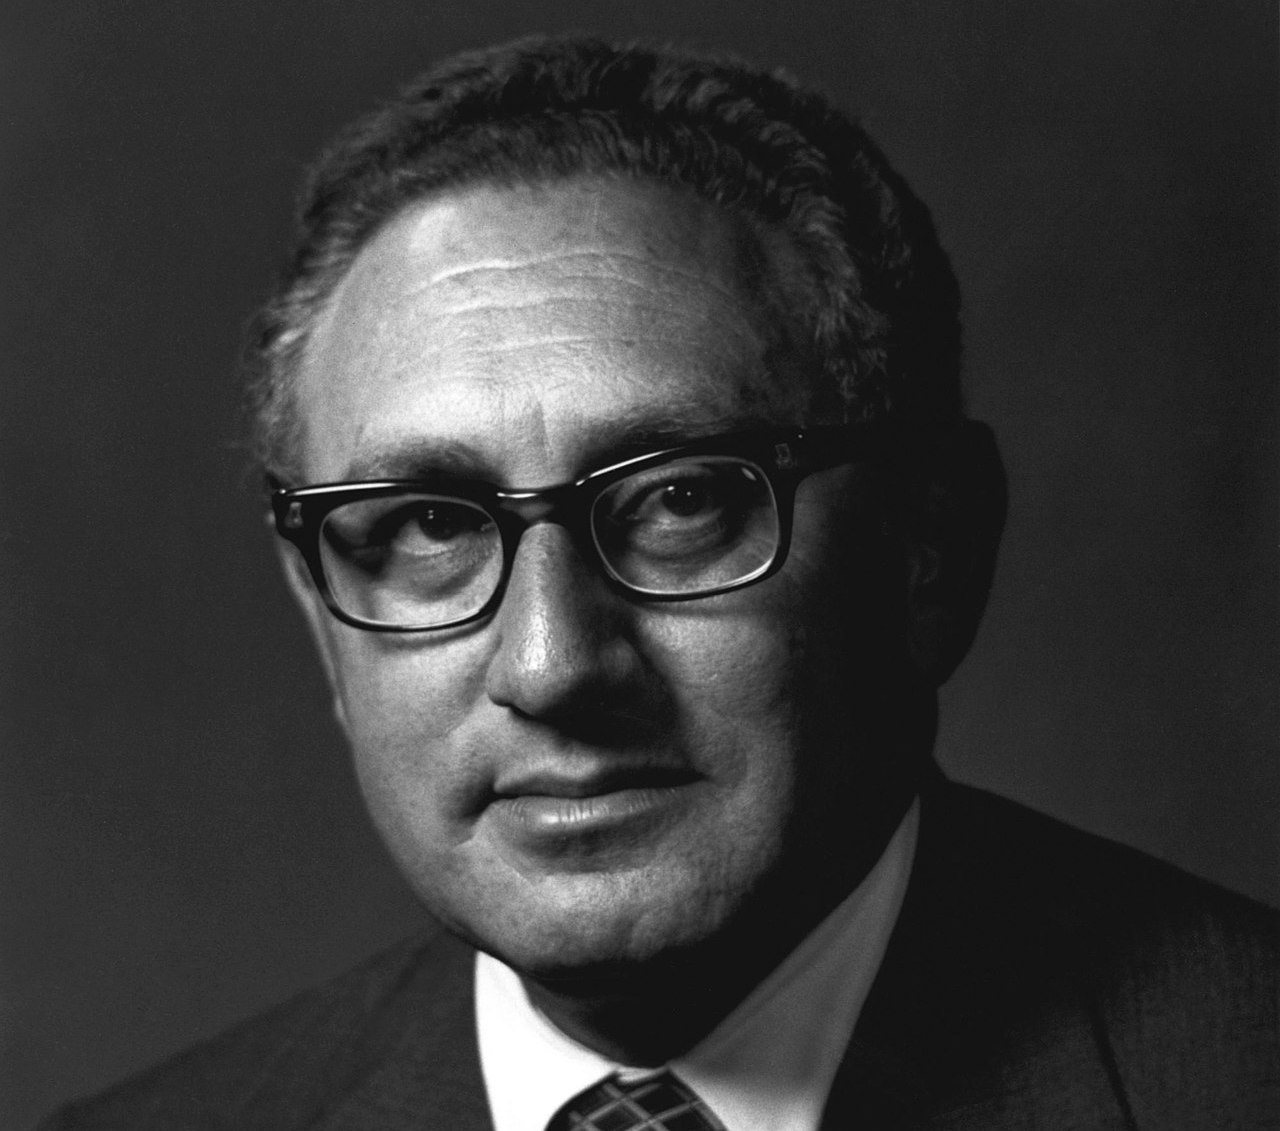  Henry Kissinger, war criminal who aided Pakistan in 1971 Bengali genocide in Bangladesh and called Indira Gandhi ‘bitch’, dies at 100